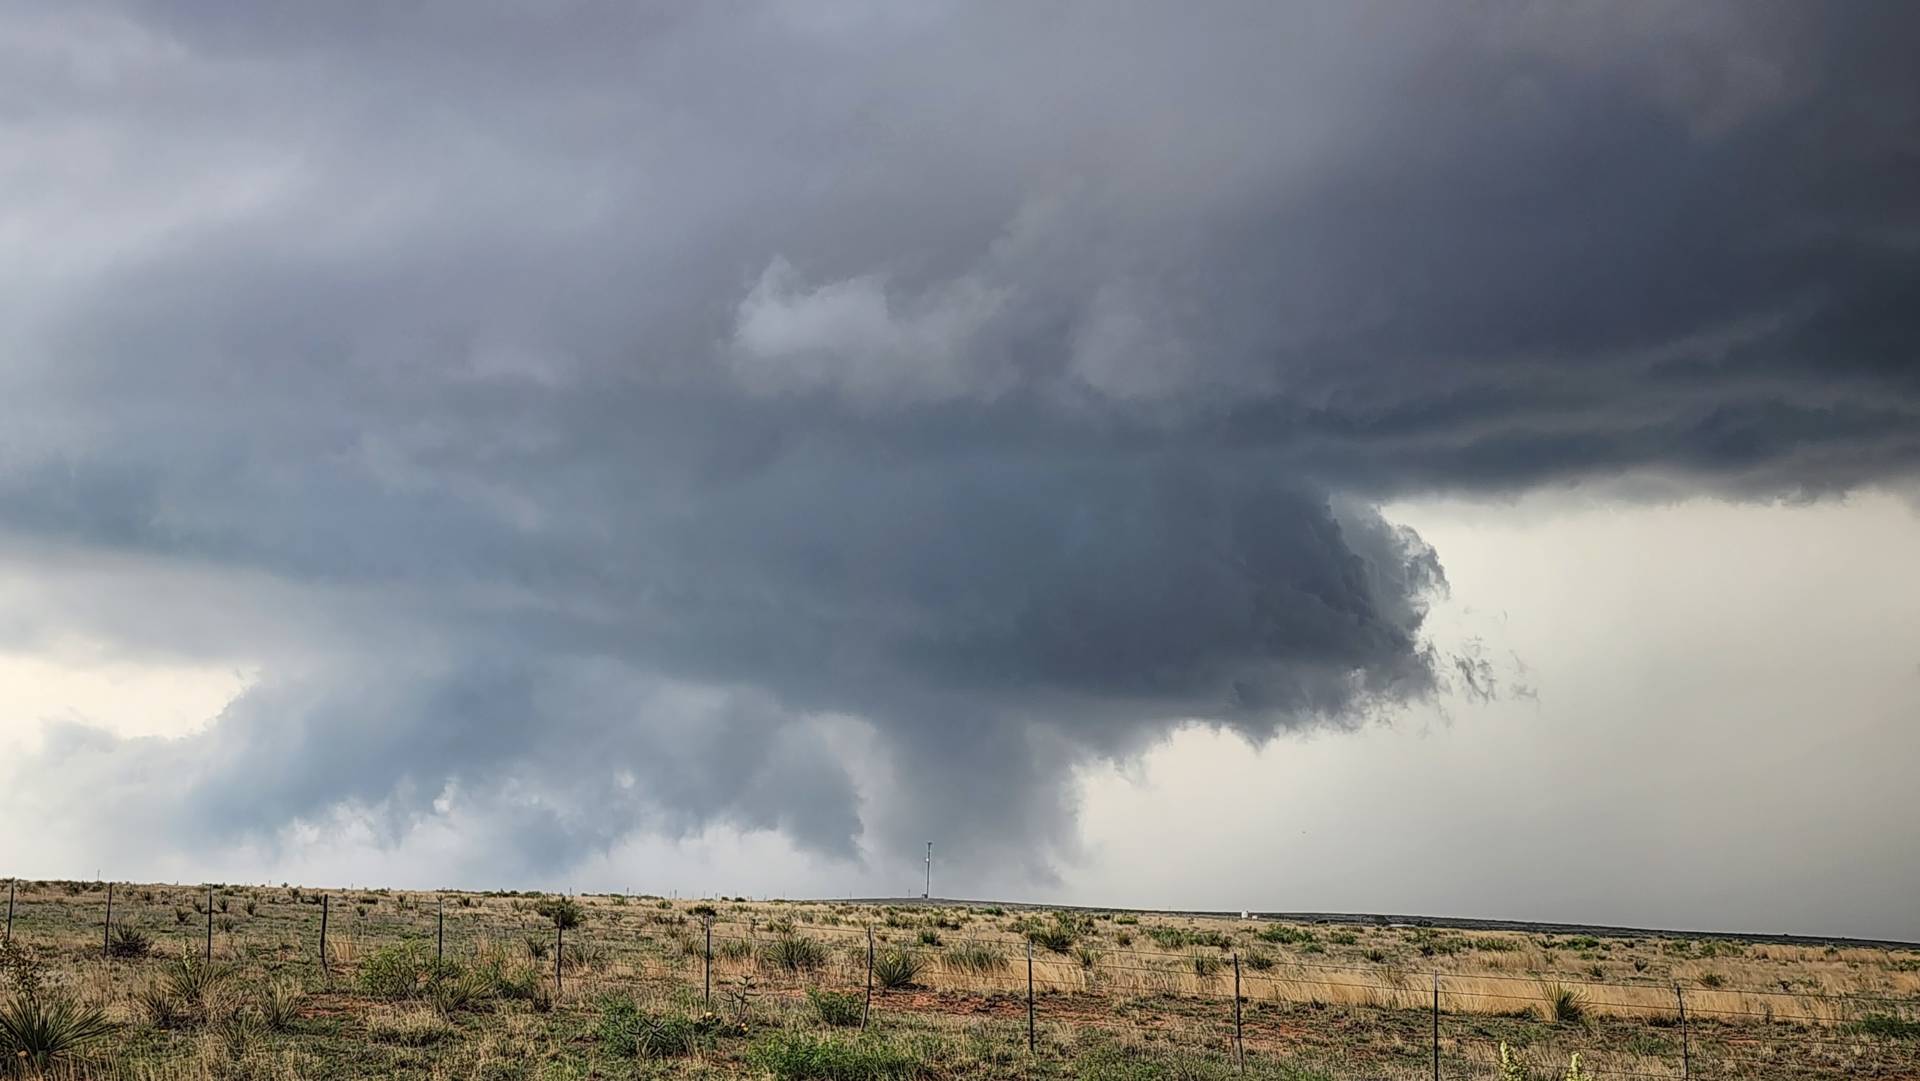 Yet another textbook supercell and wall cloud near Fort Sumner, New Mexico 07:02 PM  make sure you tune into our live stream on Highways & Hailstones @NWSAlbuquerque #nmwx